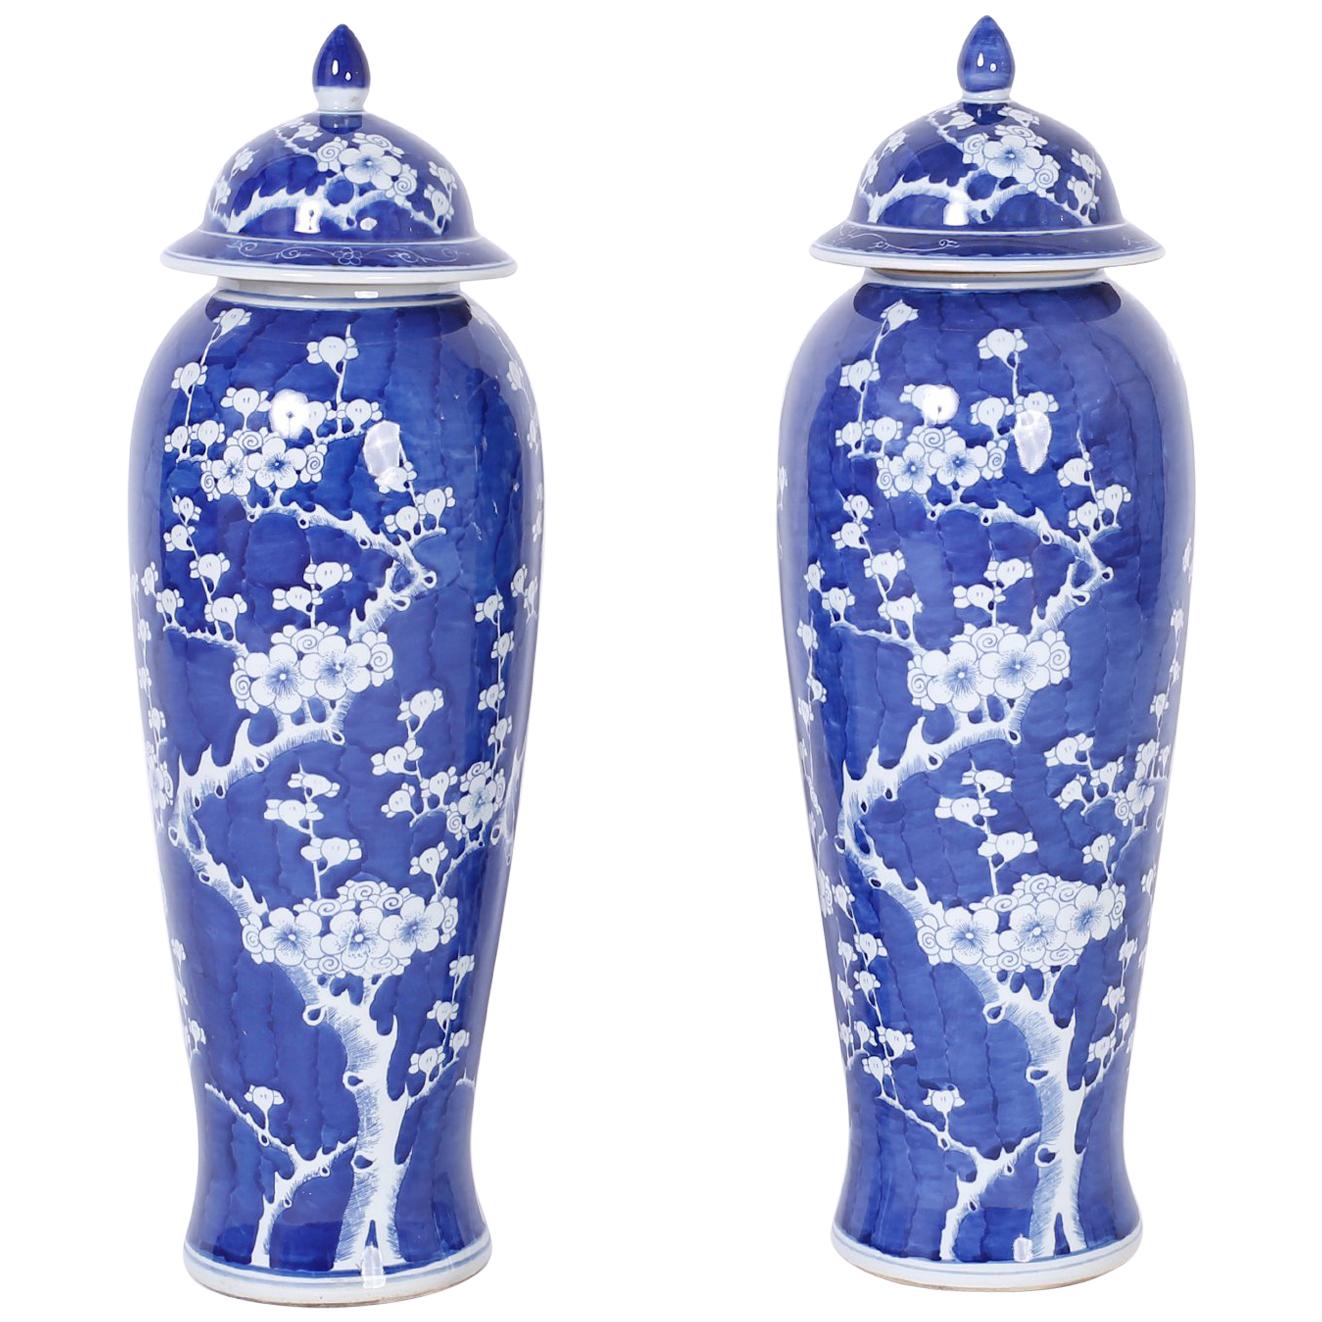 Pair of Tall Blue and White Chinese Porcelain Jars or Urns